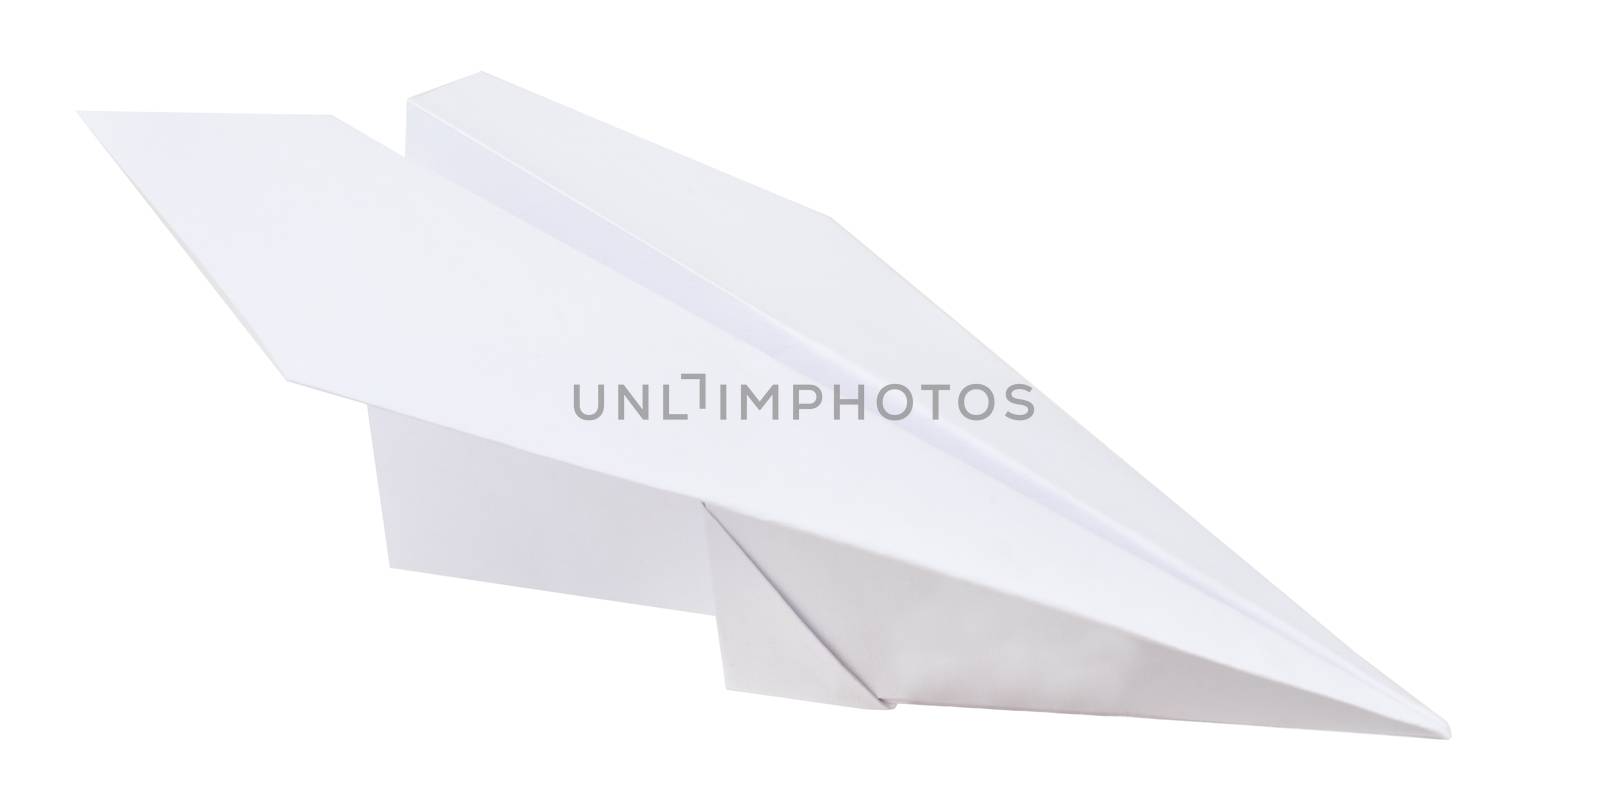 Paper plane isolated on white background, closeup